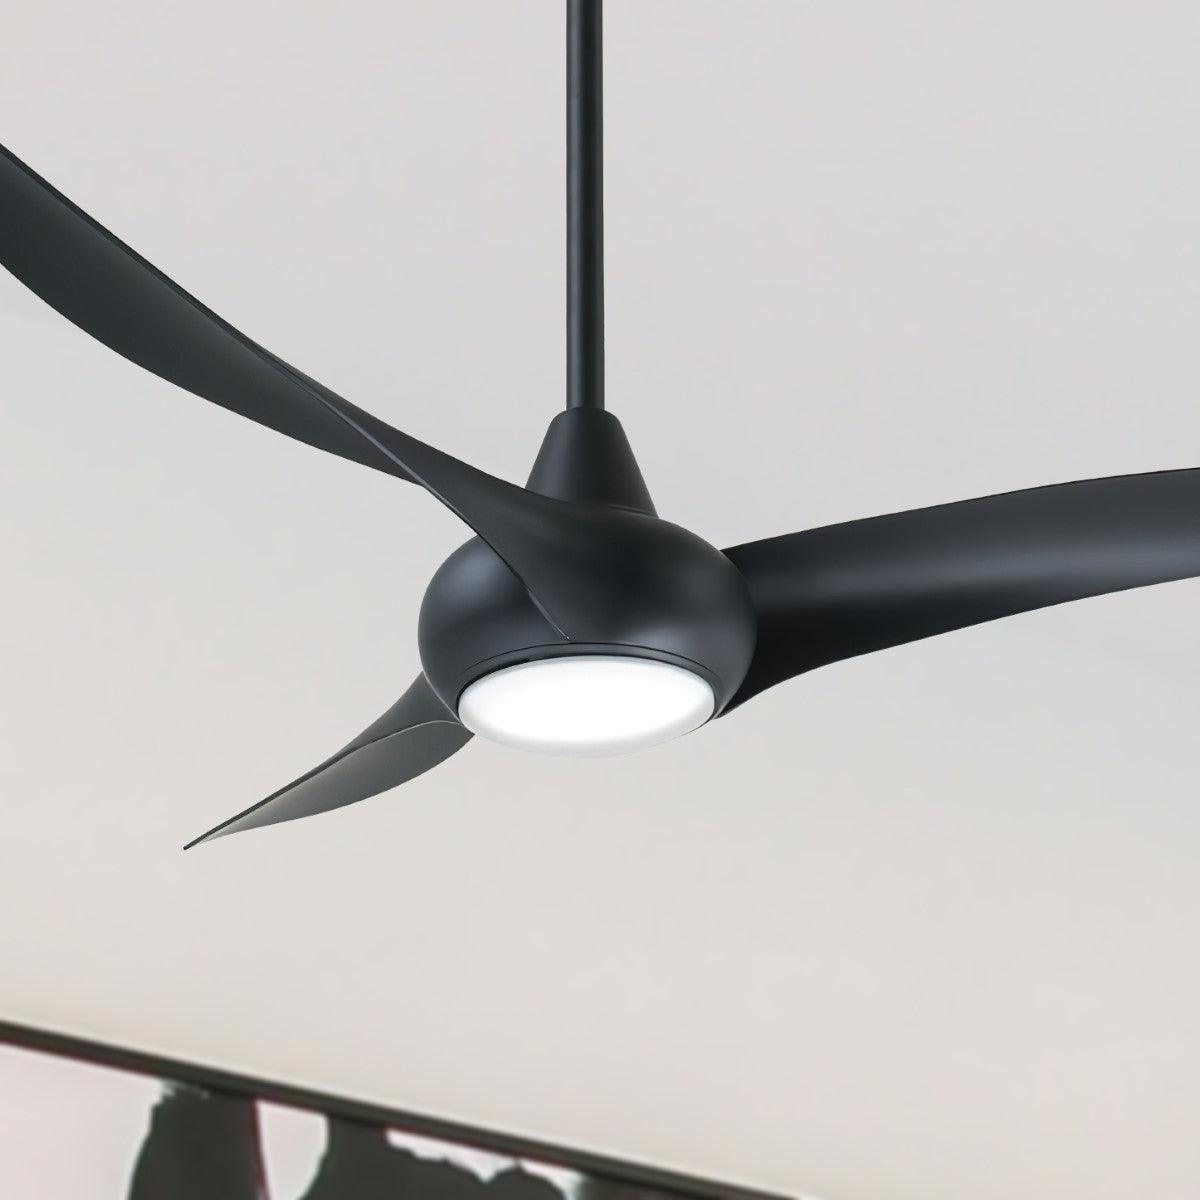 Minka Aire Light Wave 52 Inch Modern Propeller Ceiling Fan With And Remote Bees Lighting